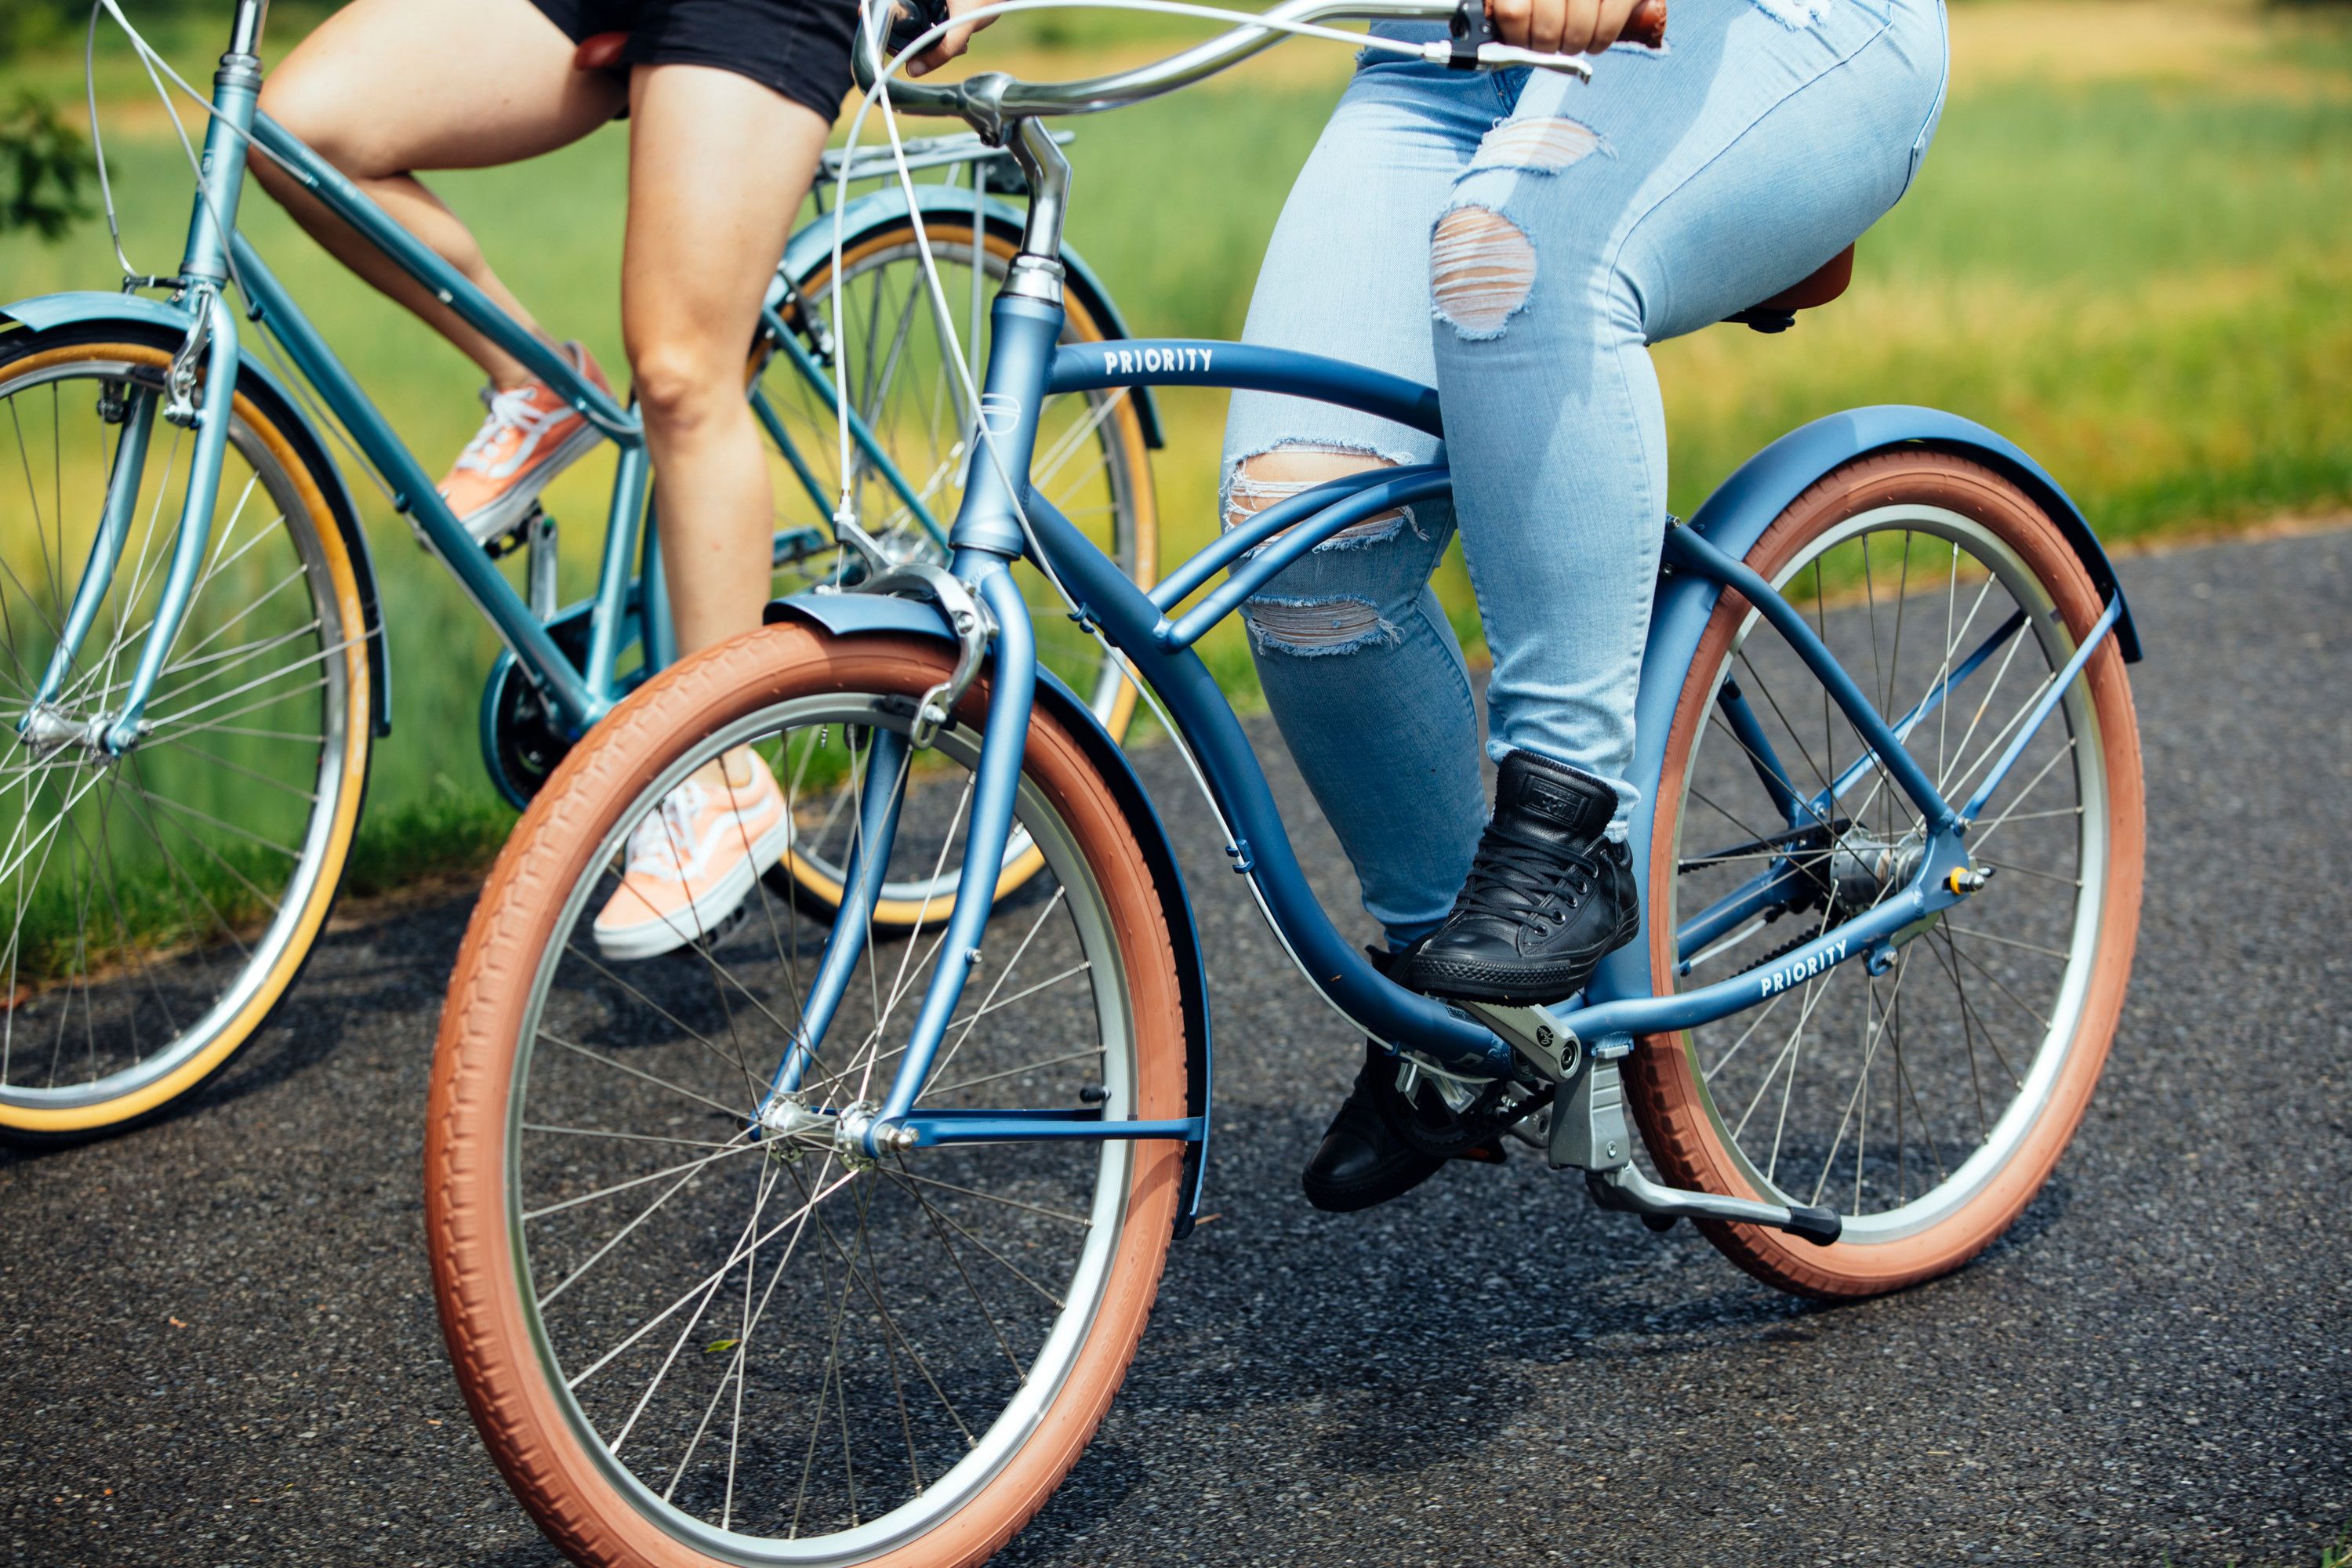 How to Ride a Bike - Learn How to Ride a Bike as an Adult